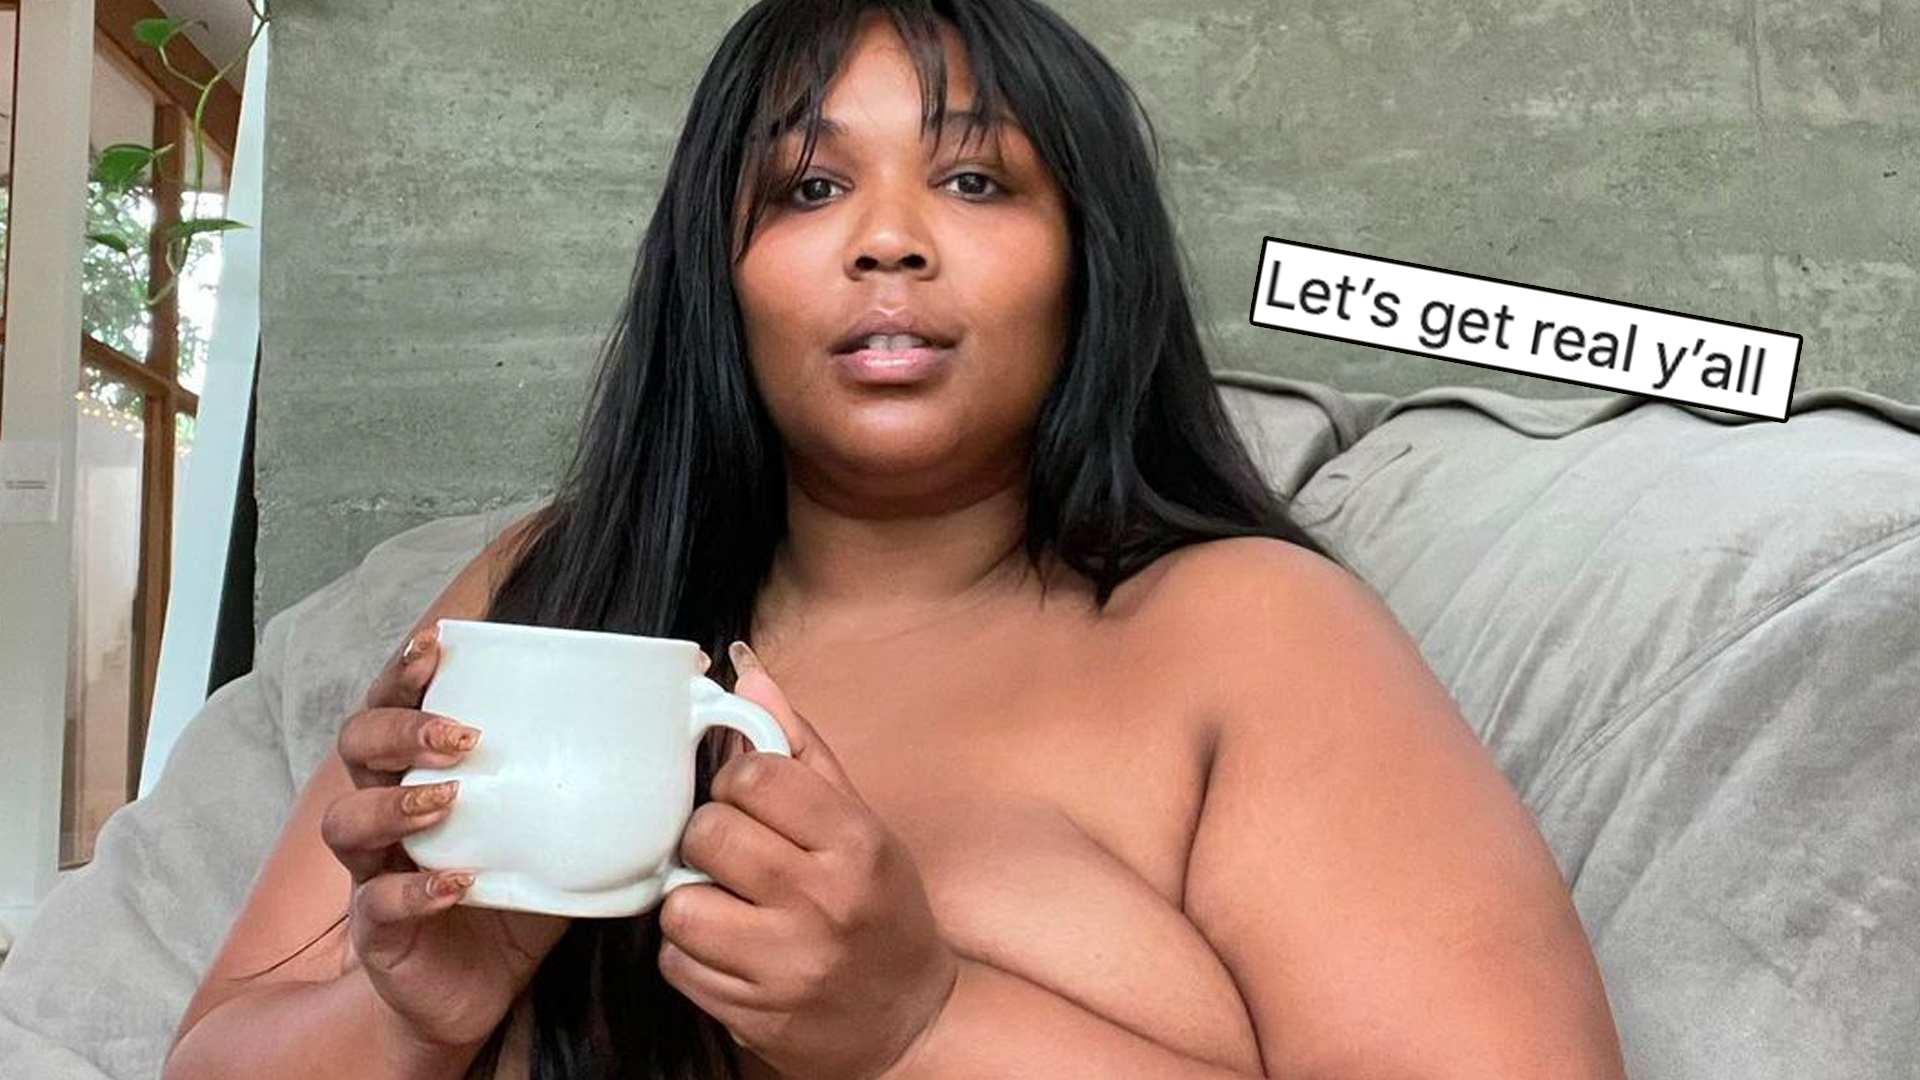 Lizzo’s naked Instagram selfie pushes for conversation on beauty standards